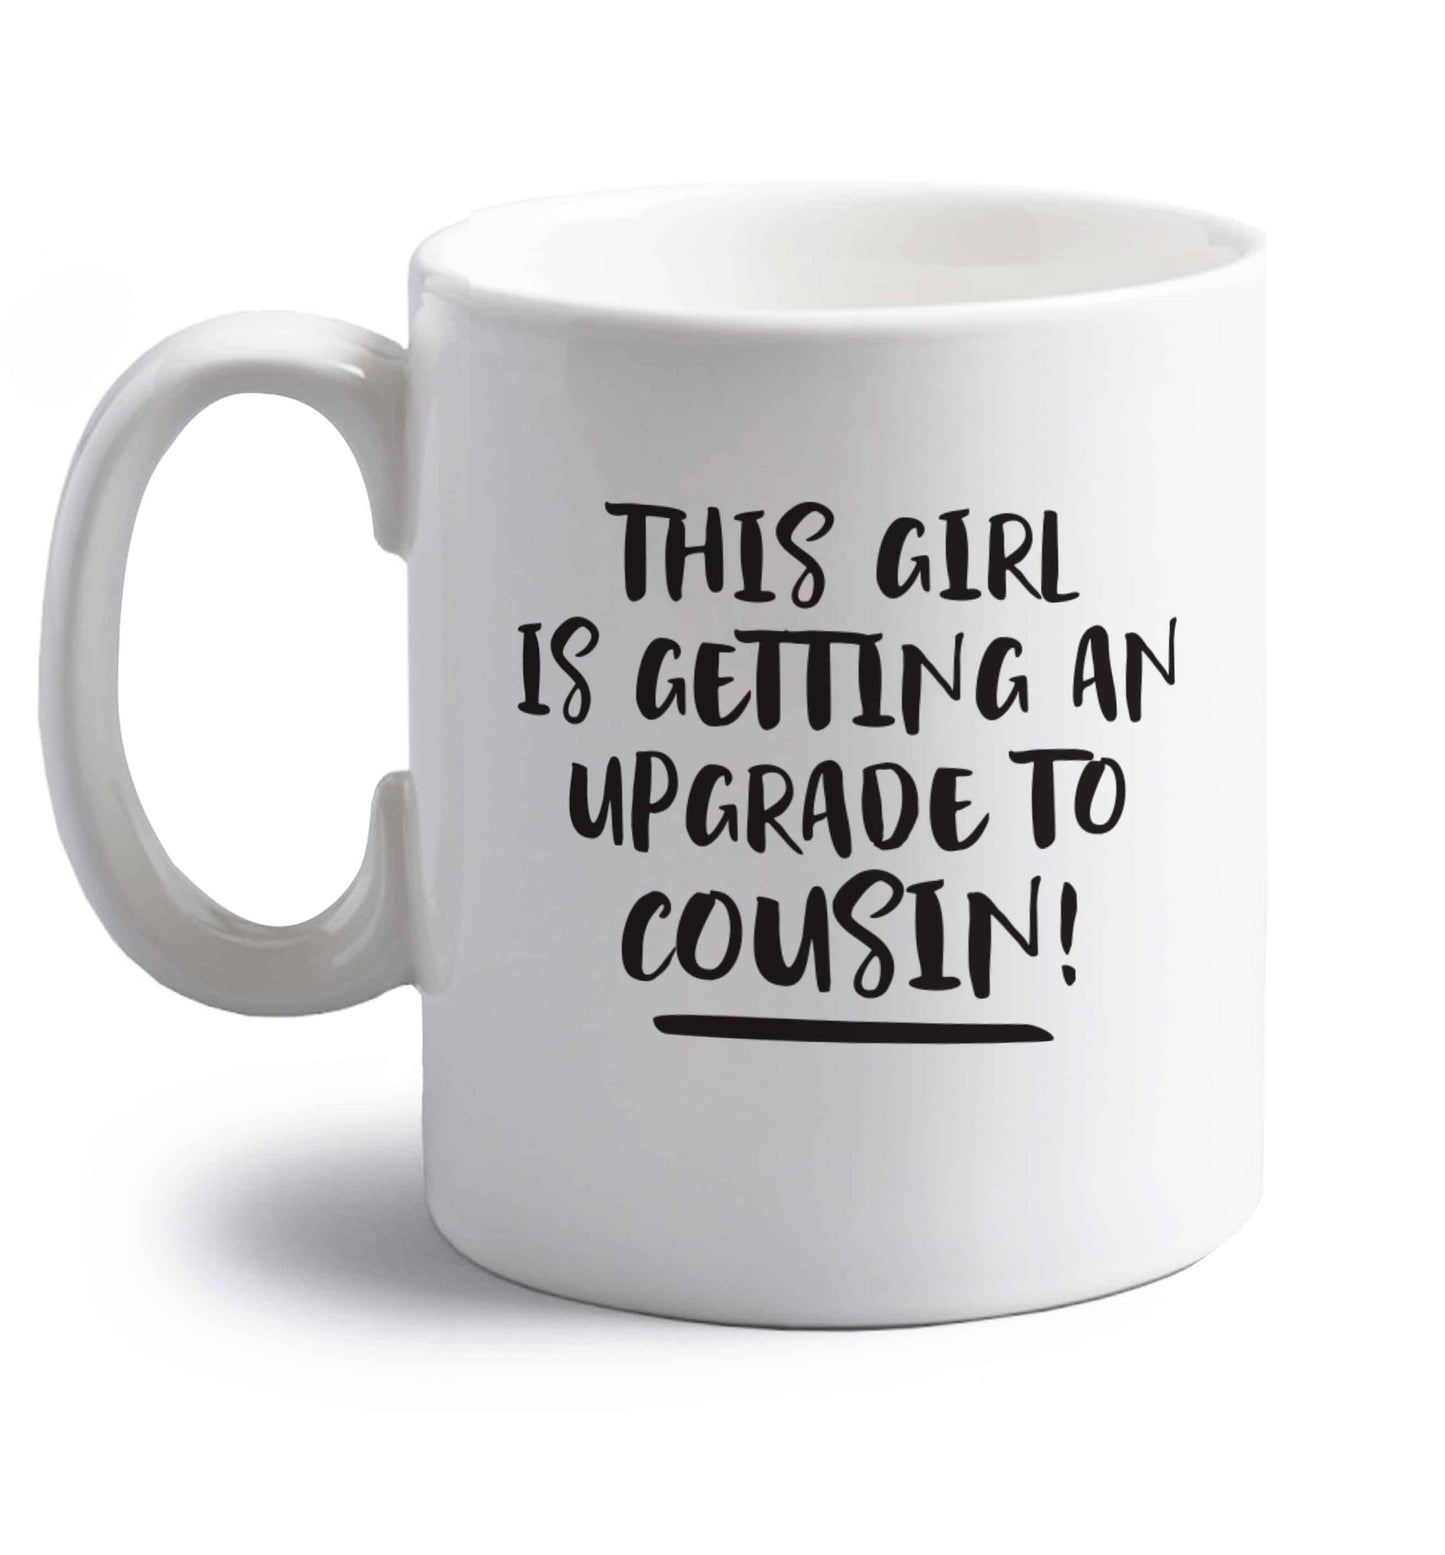 This girl is getting an upgrade to cousin! right handed white ceramic mug 